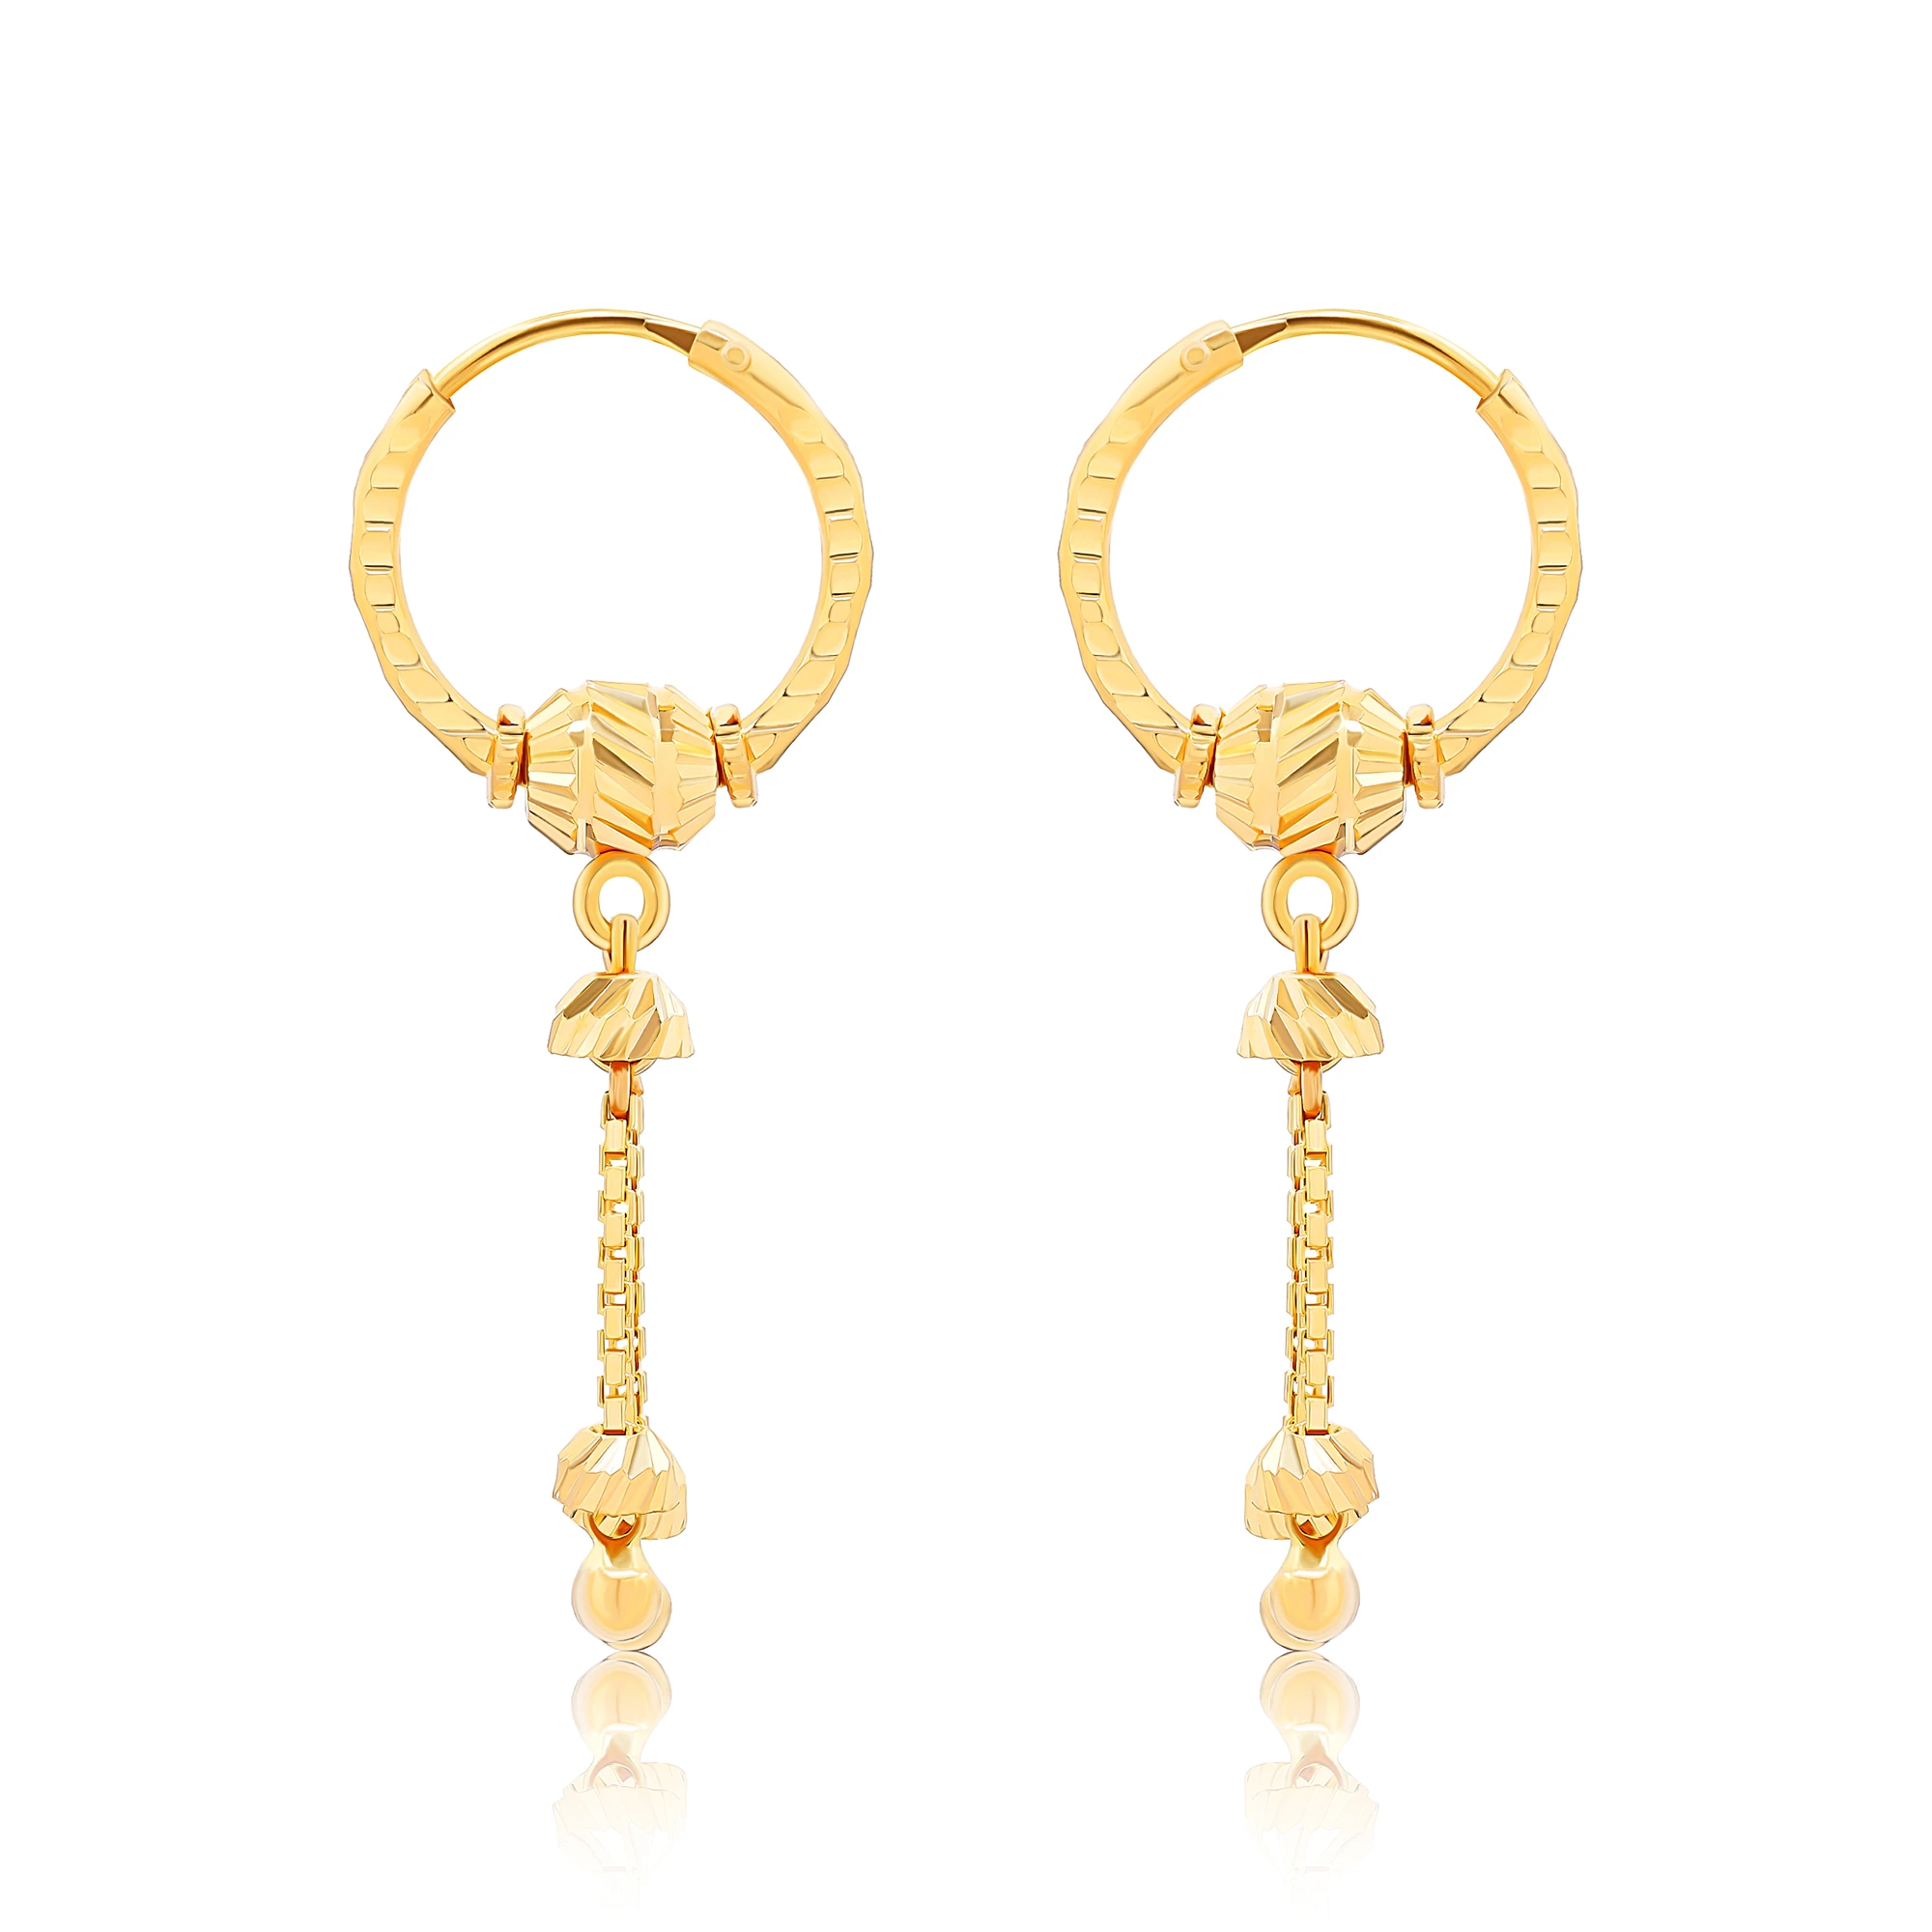 22K Gold Kids Hoops Earring - AjEr64830 - 22 Karat gold hoop earrings for  kids are beaded with gold balls at the center with a small fancy han